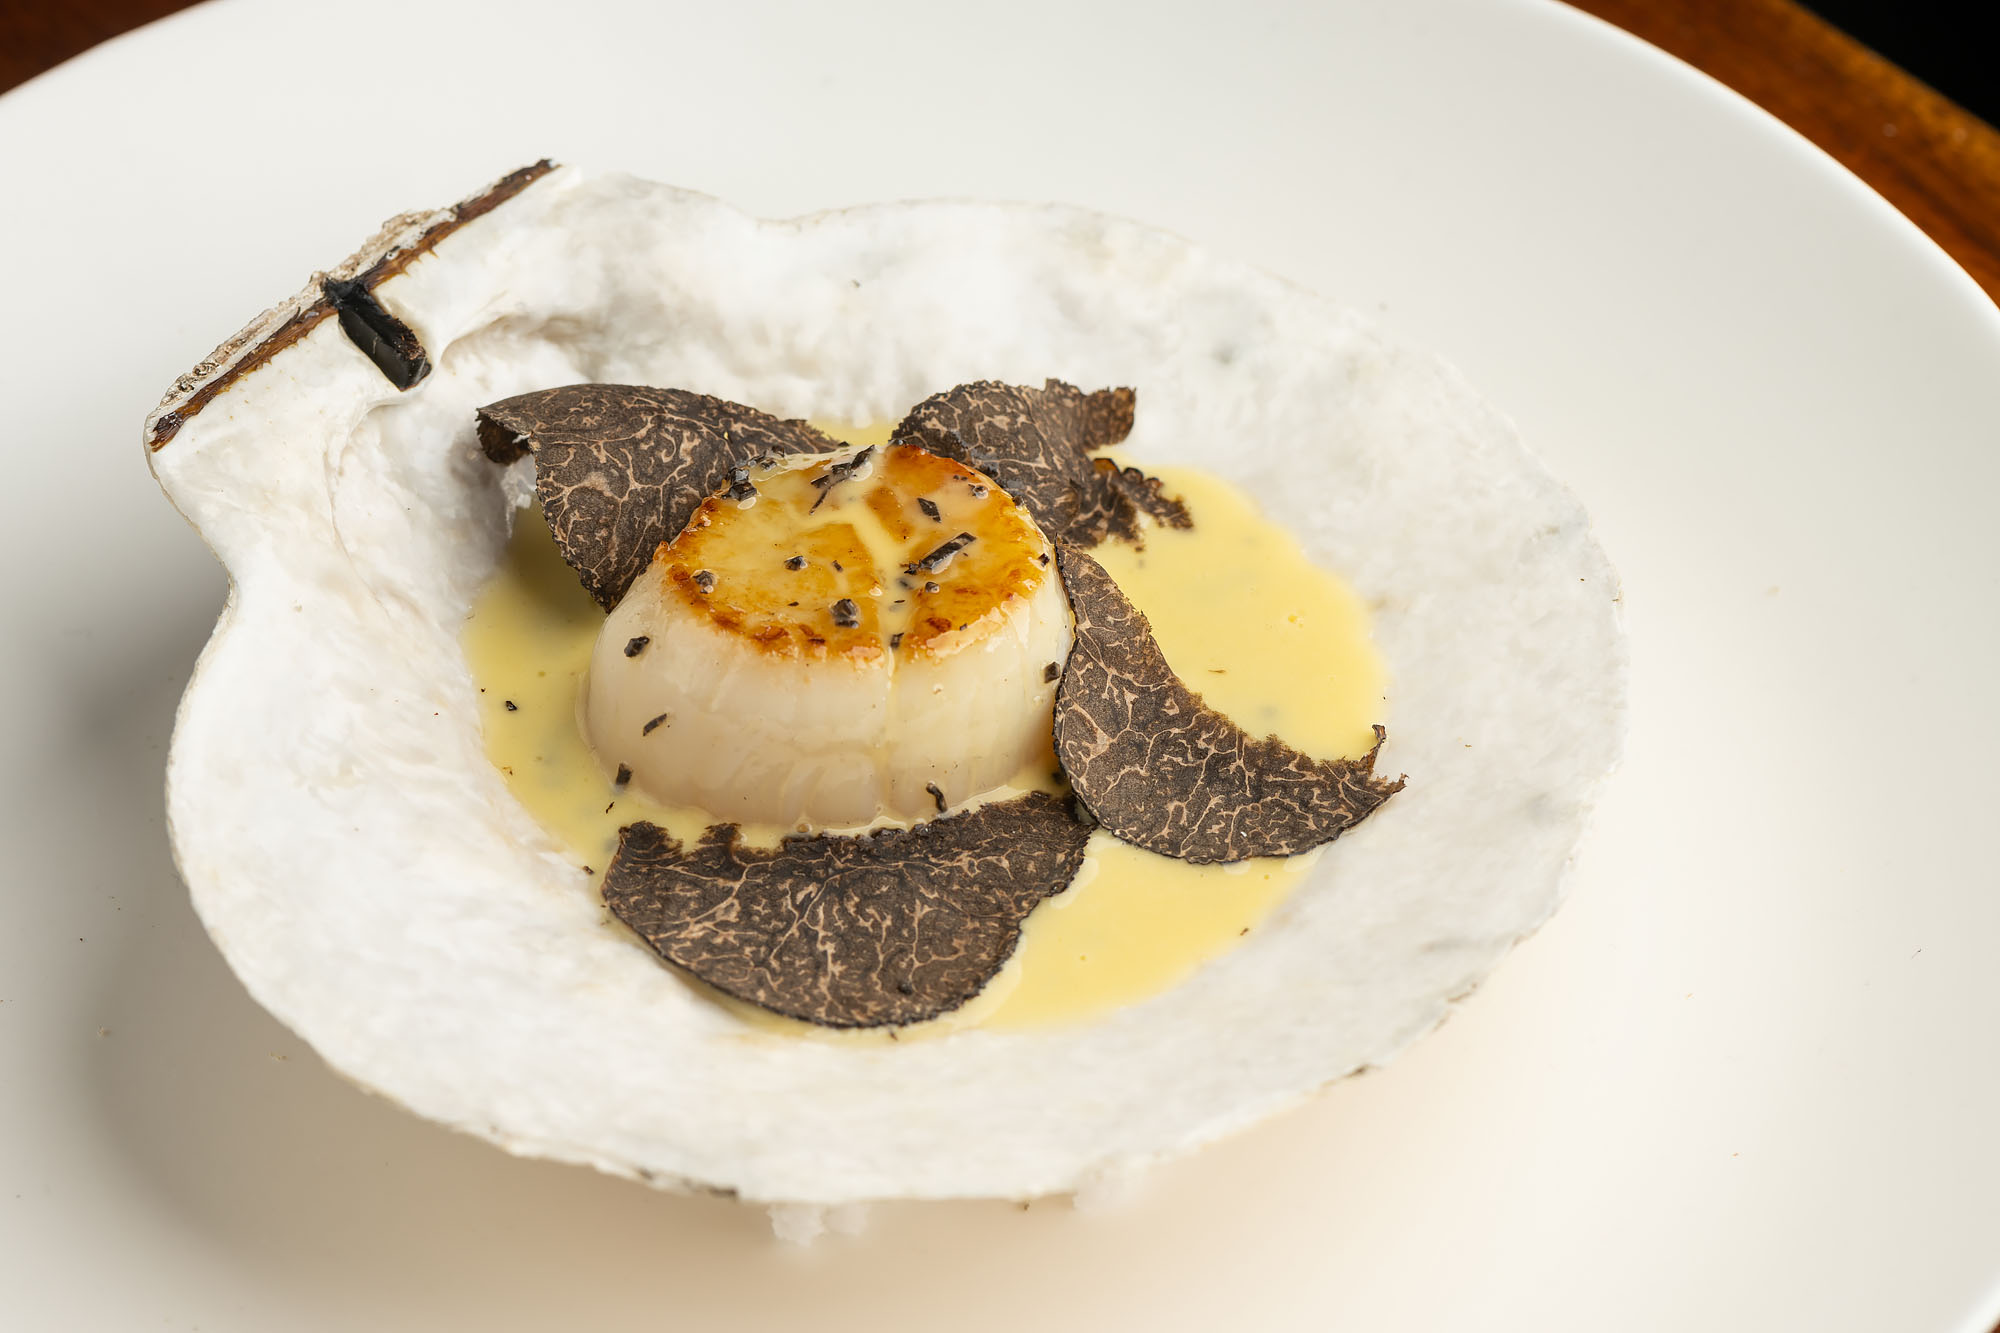 An abalone piece seared to brown with shaved truffle in a shell.